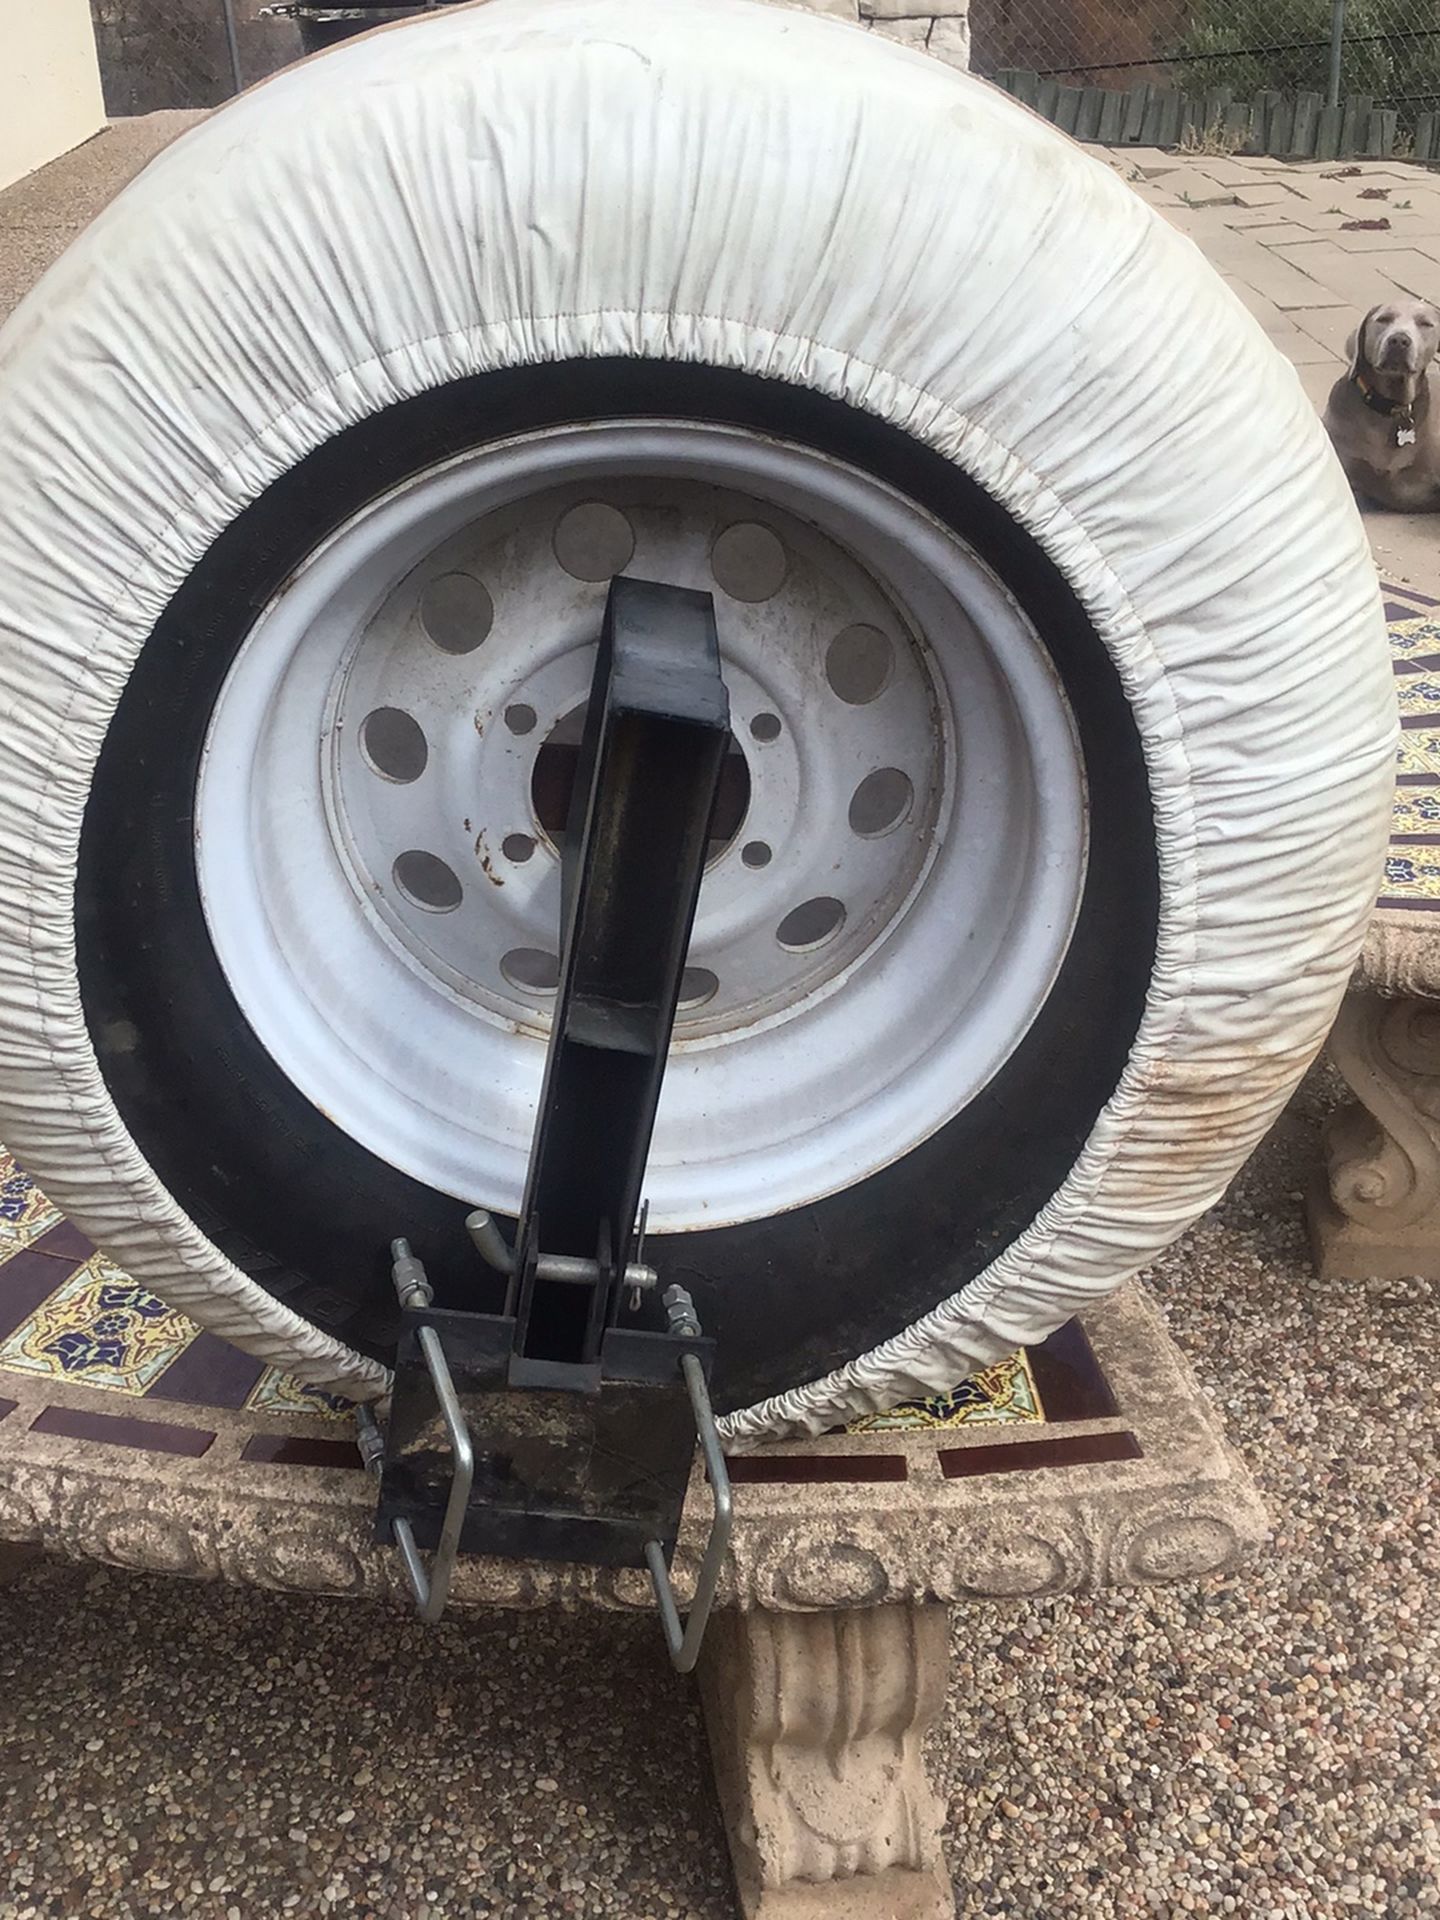 Trailer Spare Tire, Bumper Bracket And Cover